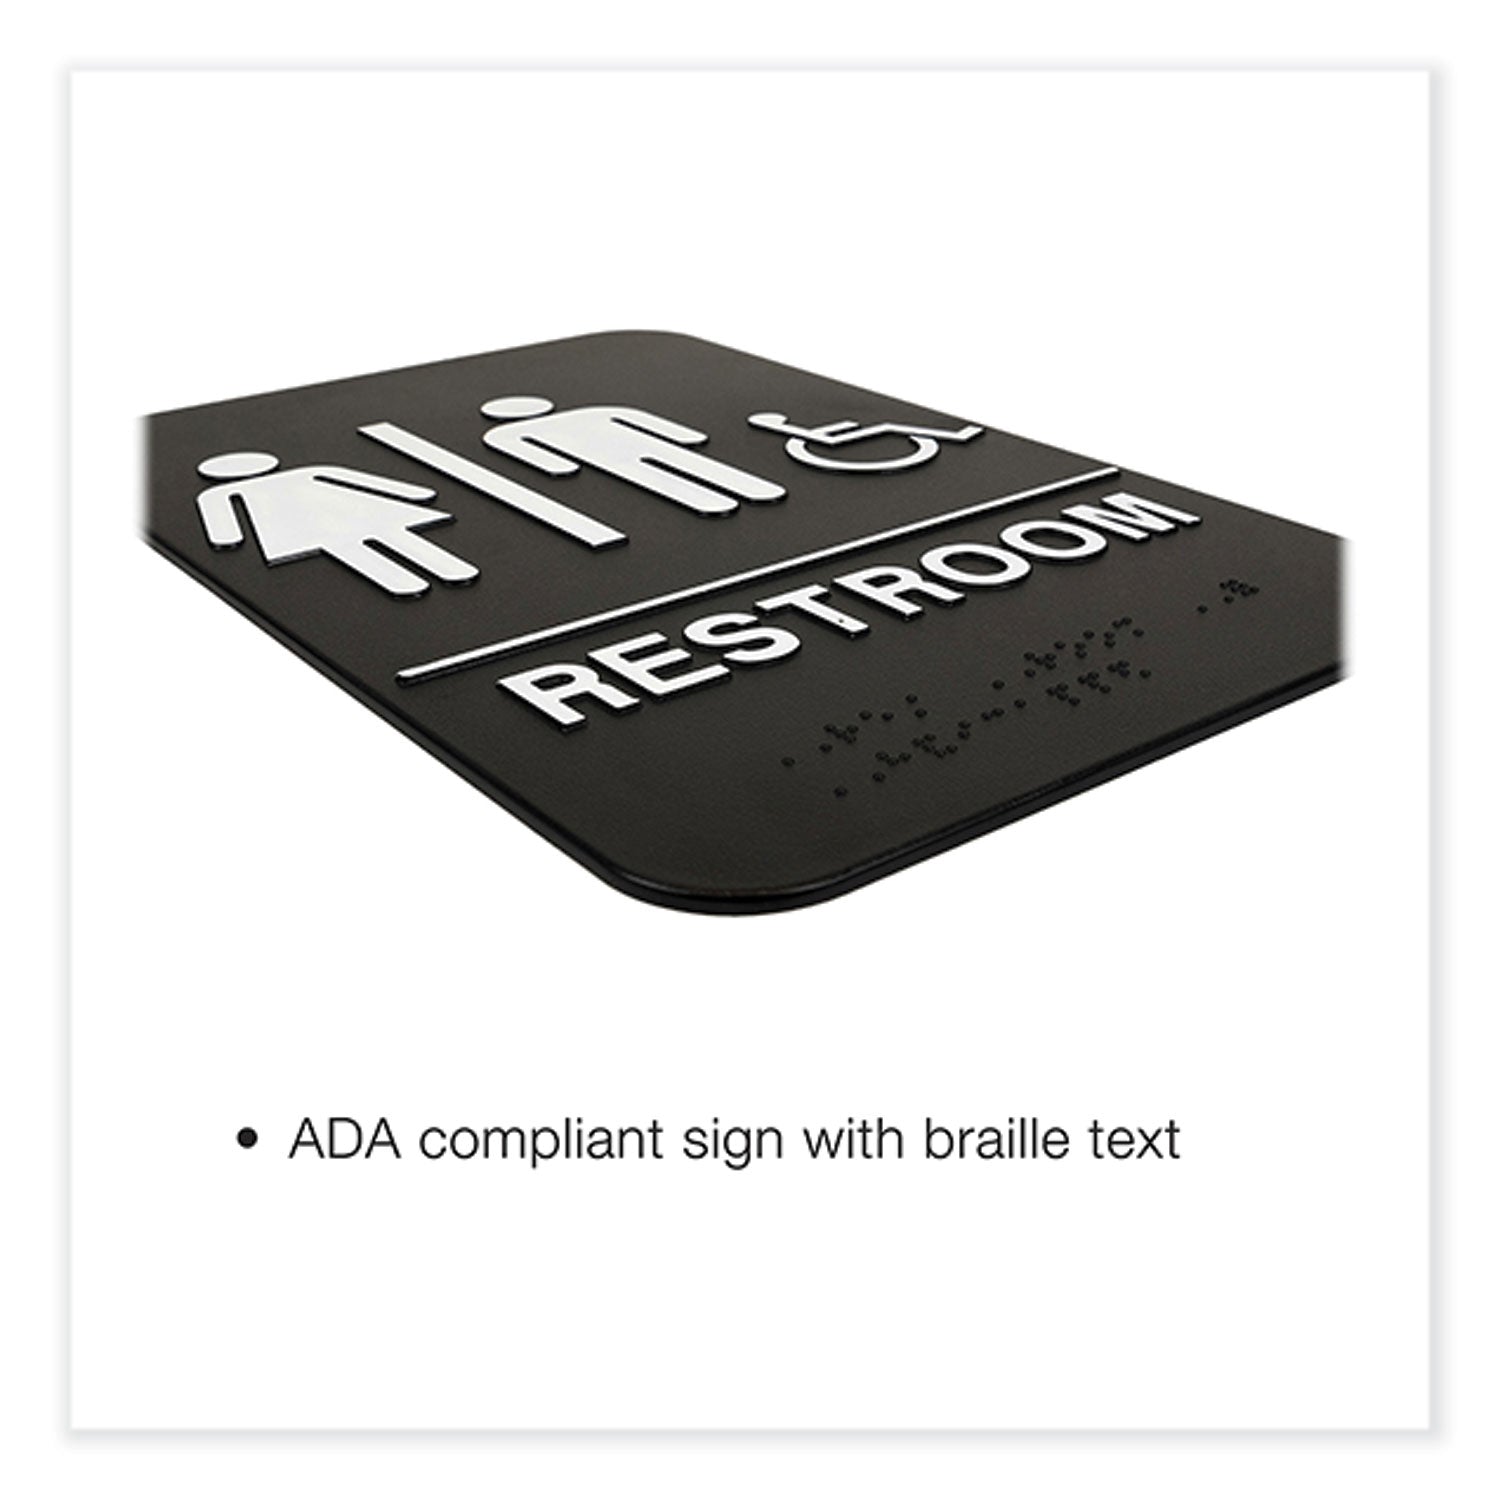 indoor-outdoor-restroom-sign-with-braille-text-and-wheelchair-6-x-9-black-face-white-graphics-3-pack_exohd0036s - 3